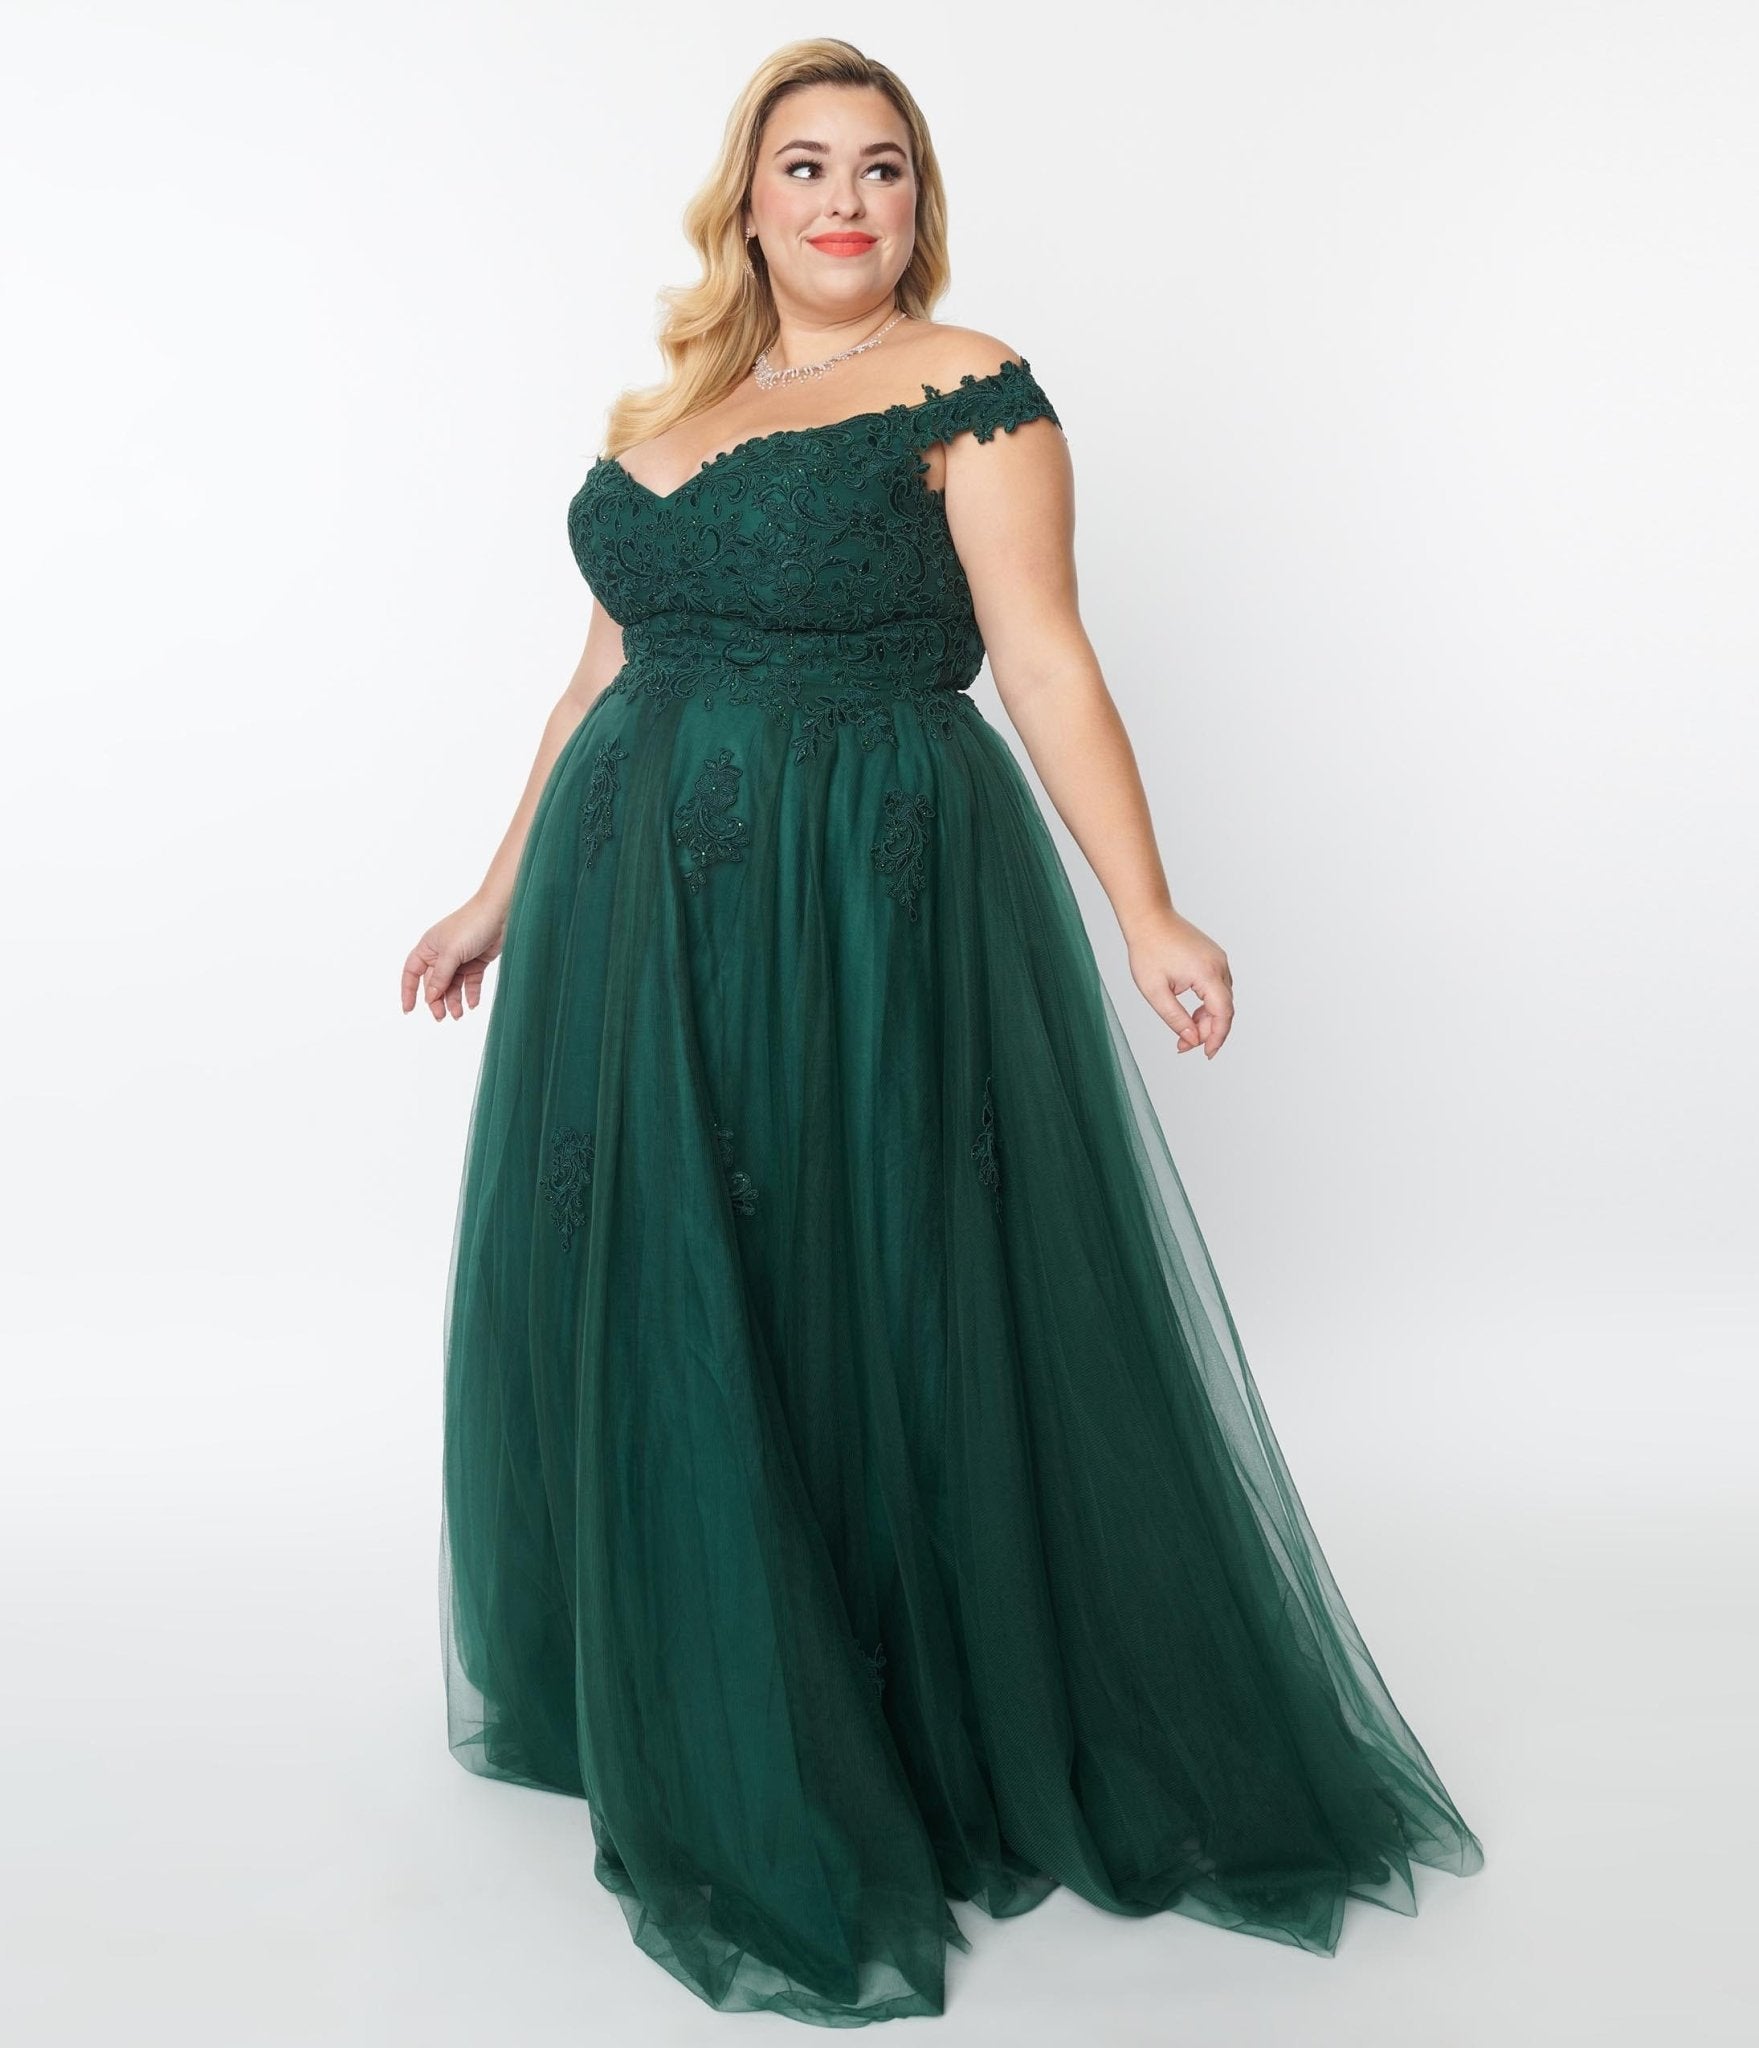 The Most Flattering Plus-Sized Dresses - 50 IS NOT OLD - A Fashion